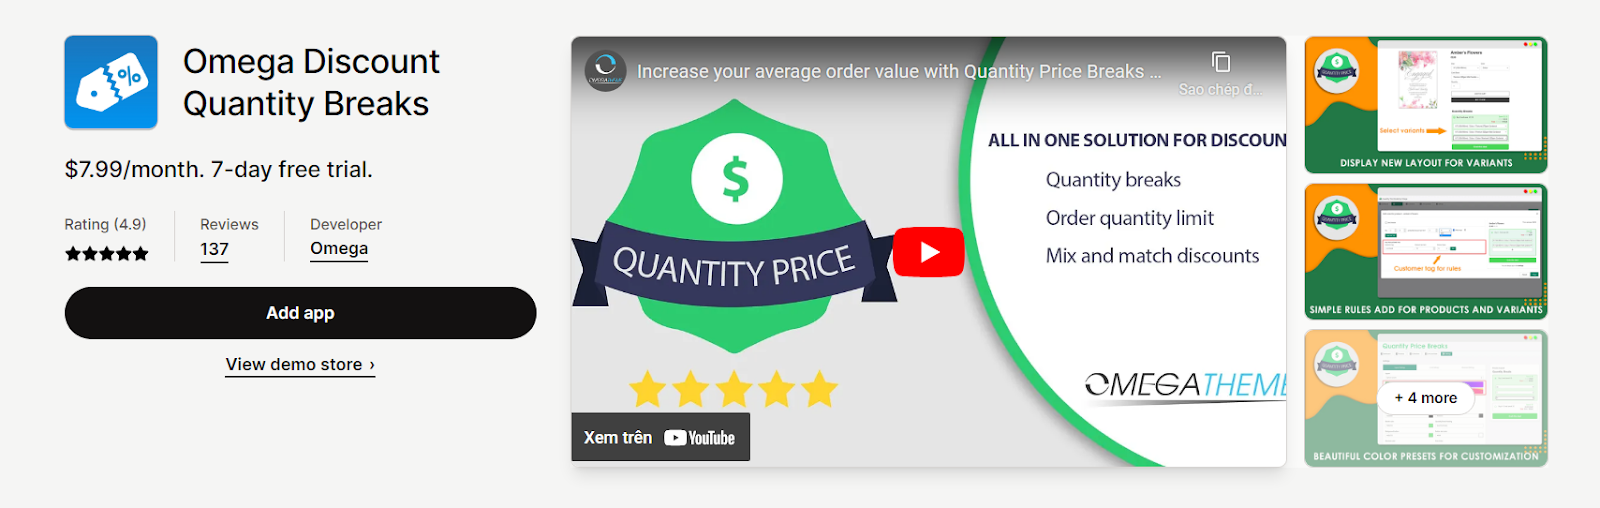 Omega Discount Quantity Breaks - A customized Shopify volume discount app with personalized pricing.